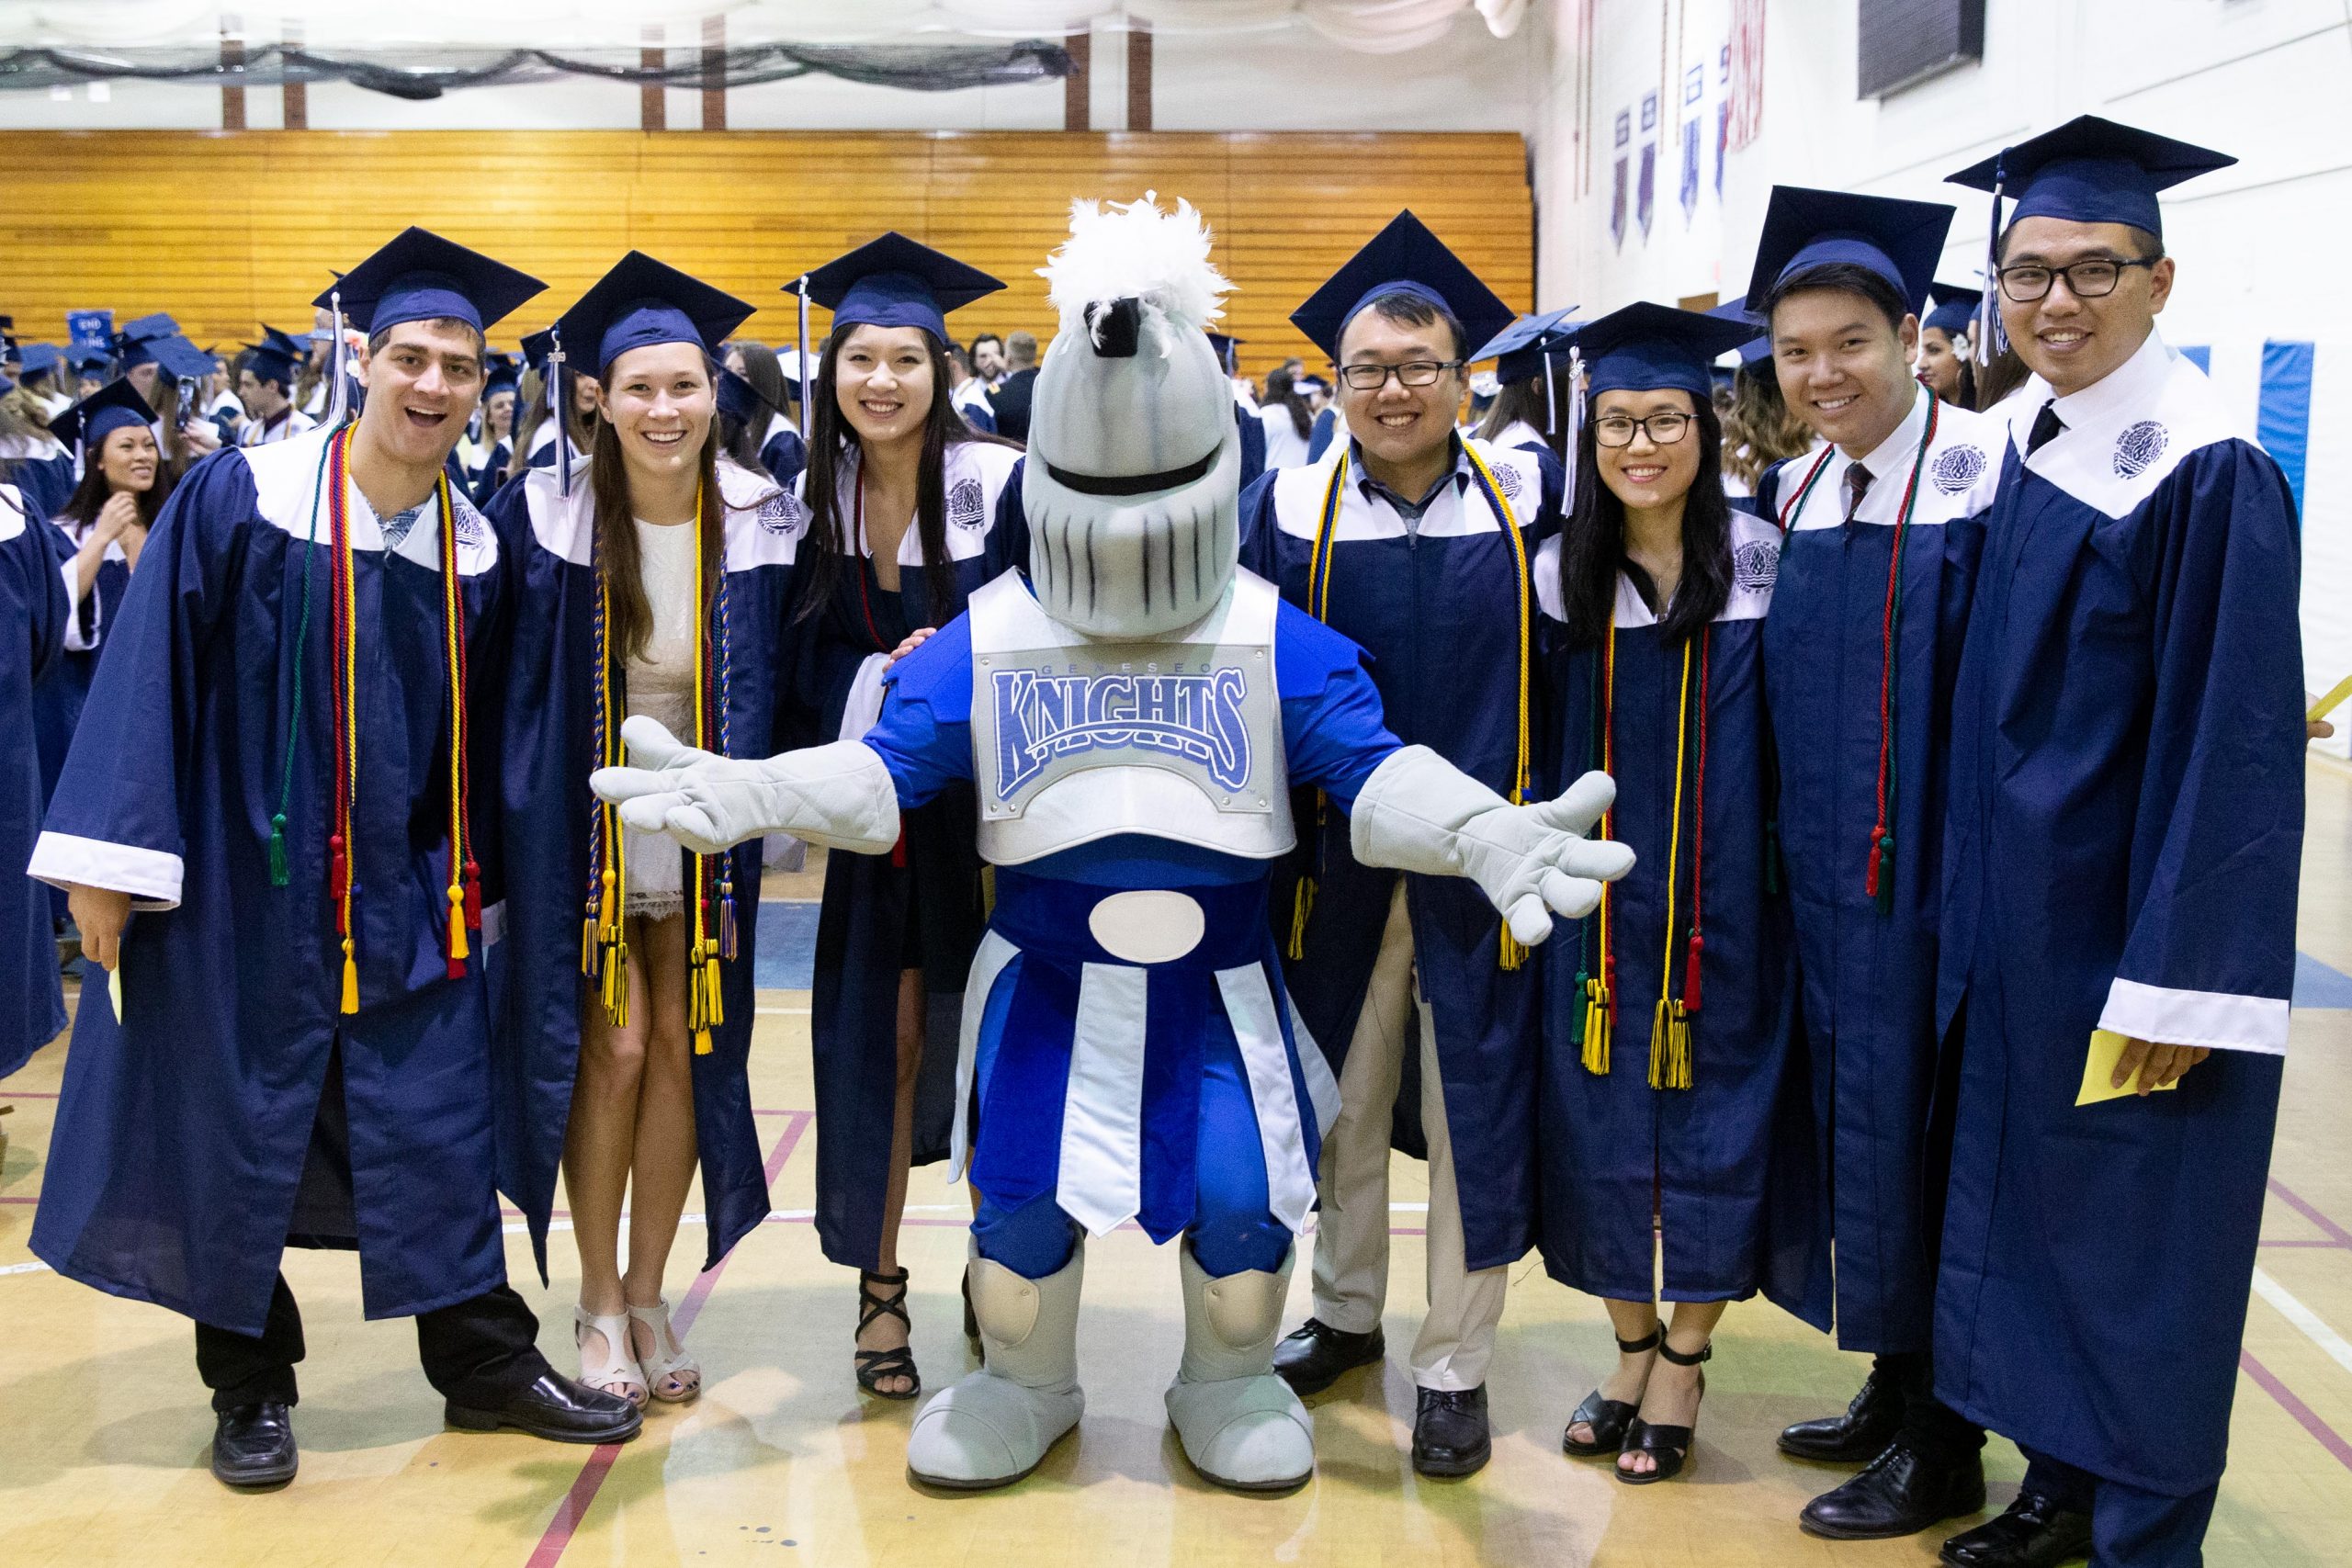 College graduates in robes and mortar board hats pose for a picture with the school mascot, a knight.